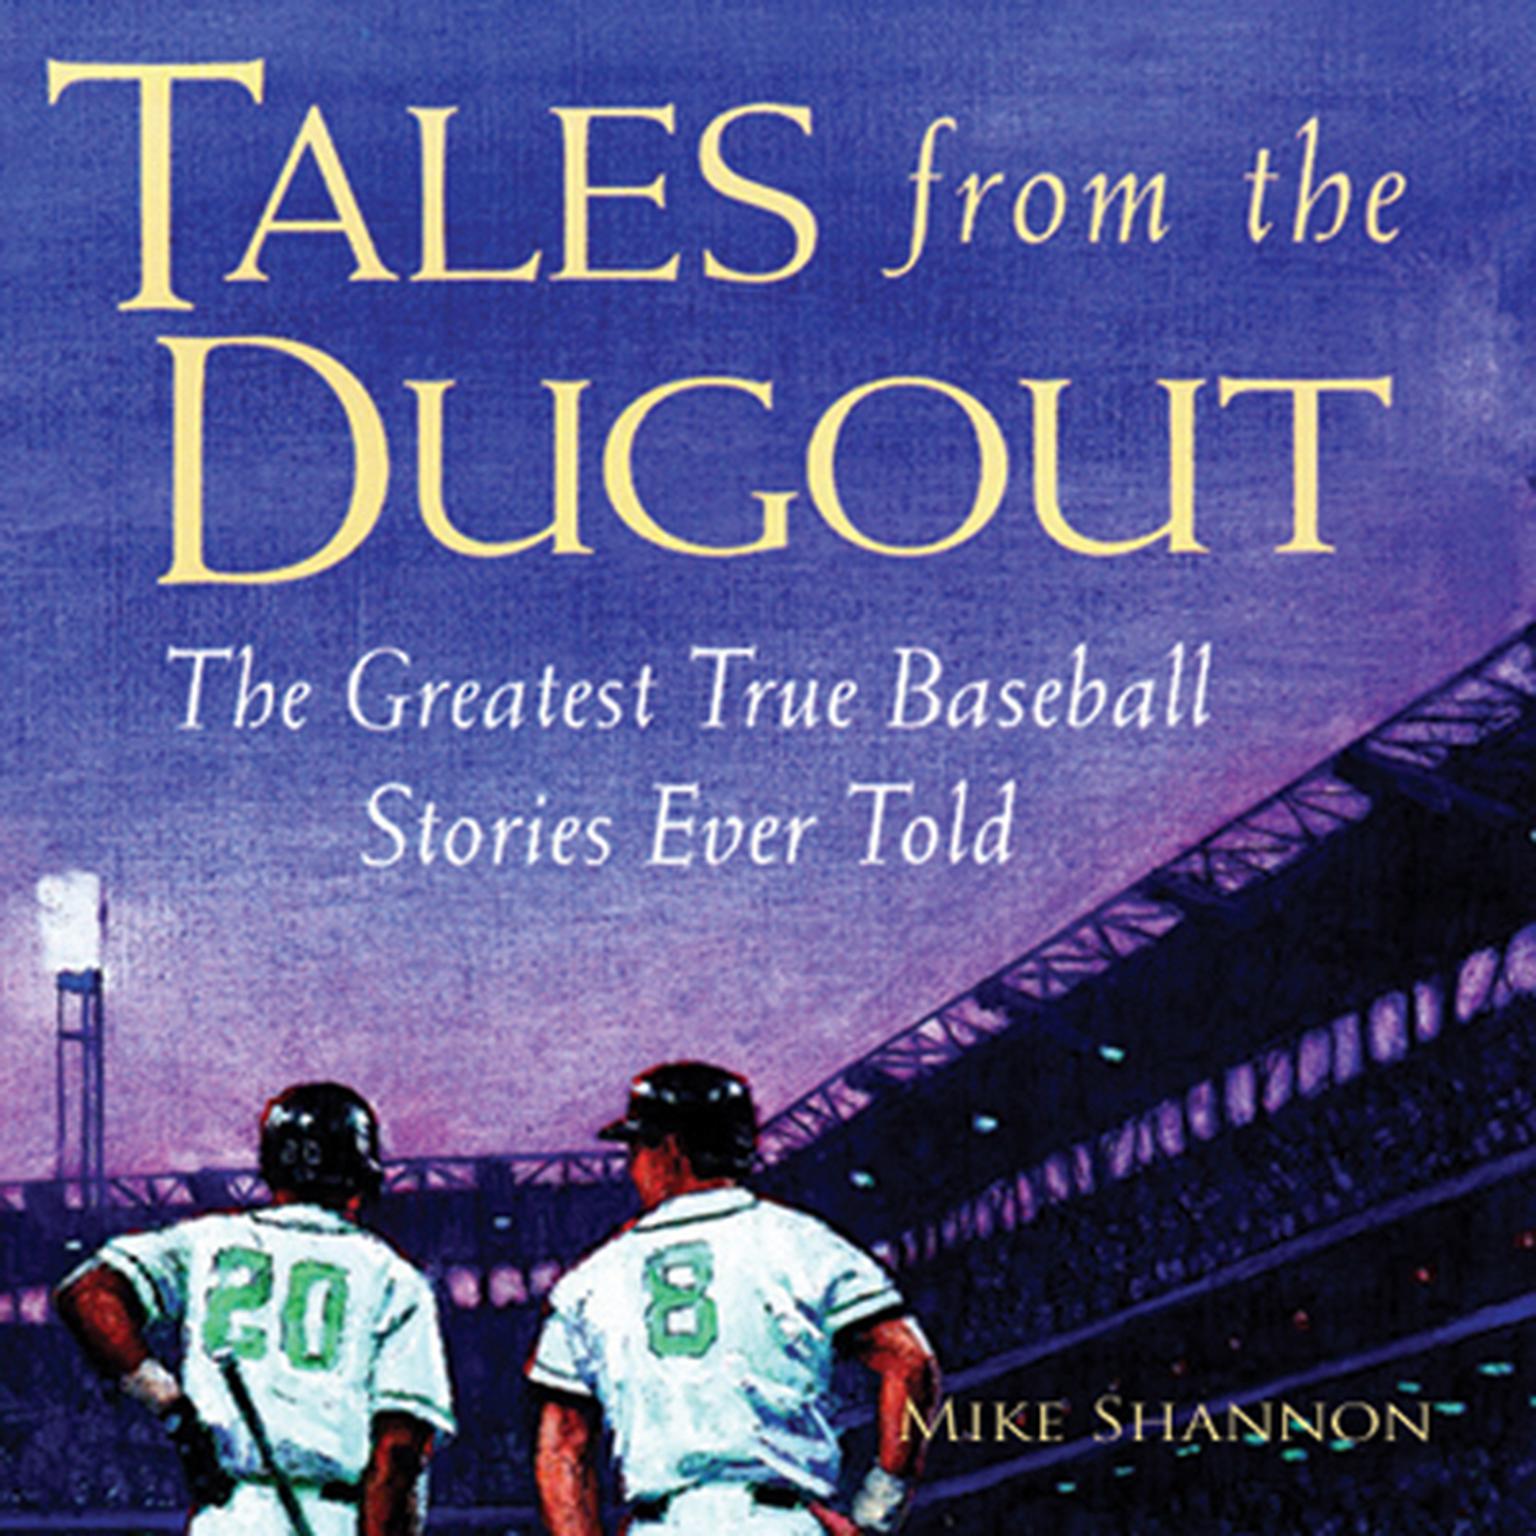 Tales from the Dugout: The Greatest True Baseball Stories Ever Told Audiobook, by Mike Shannon